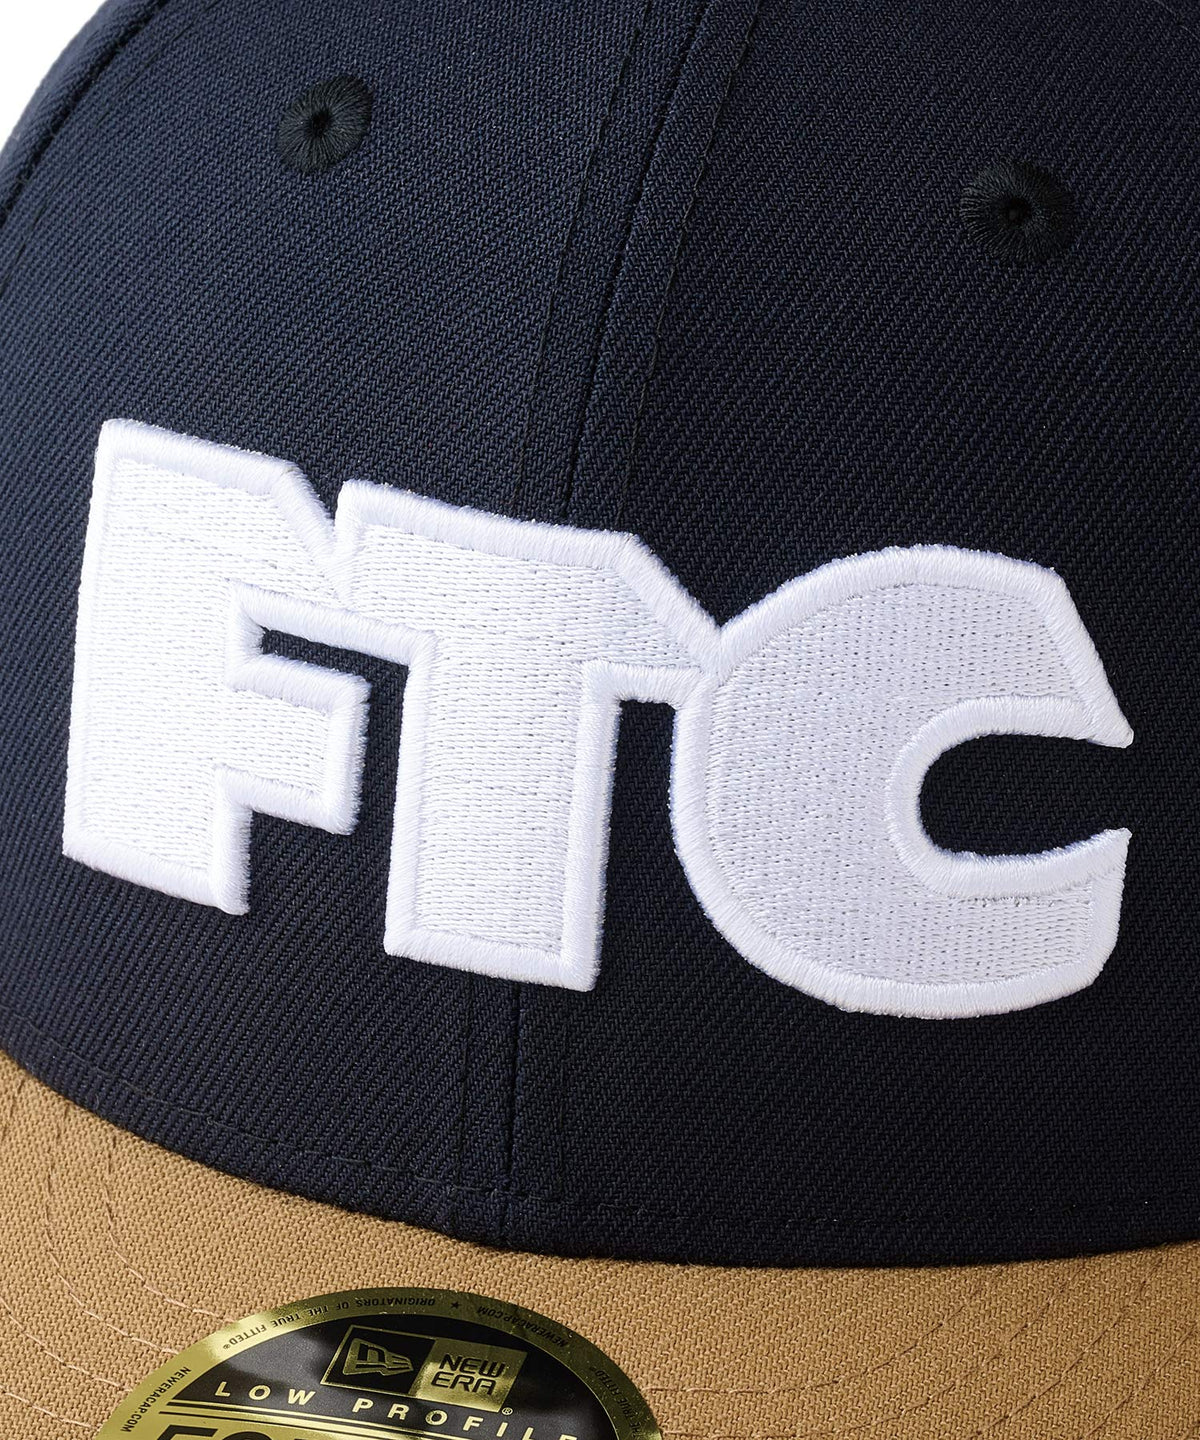 FTC NEW ERA LP 59FIFTY FITTED CAP